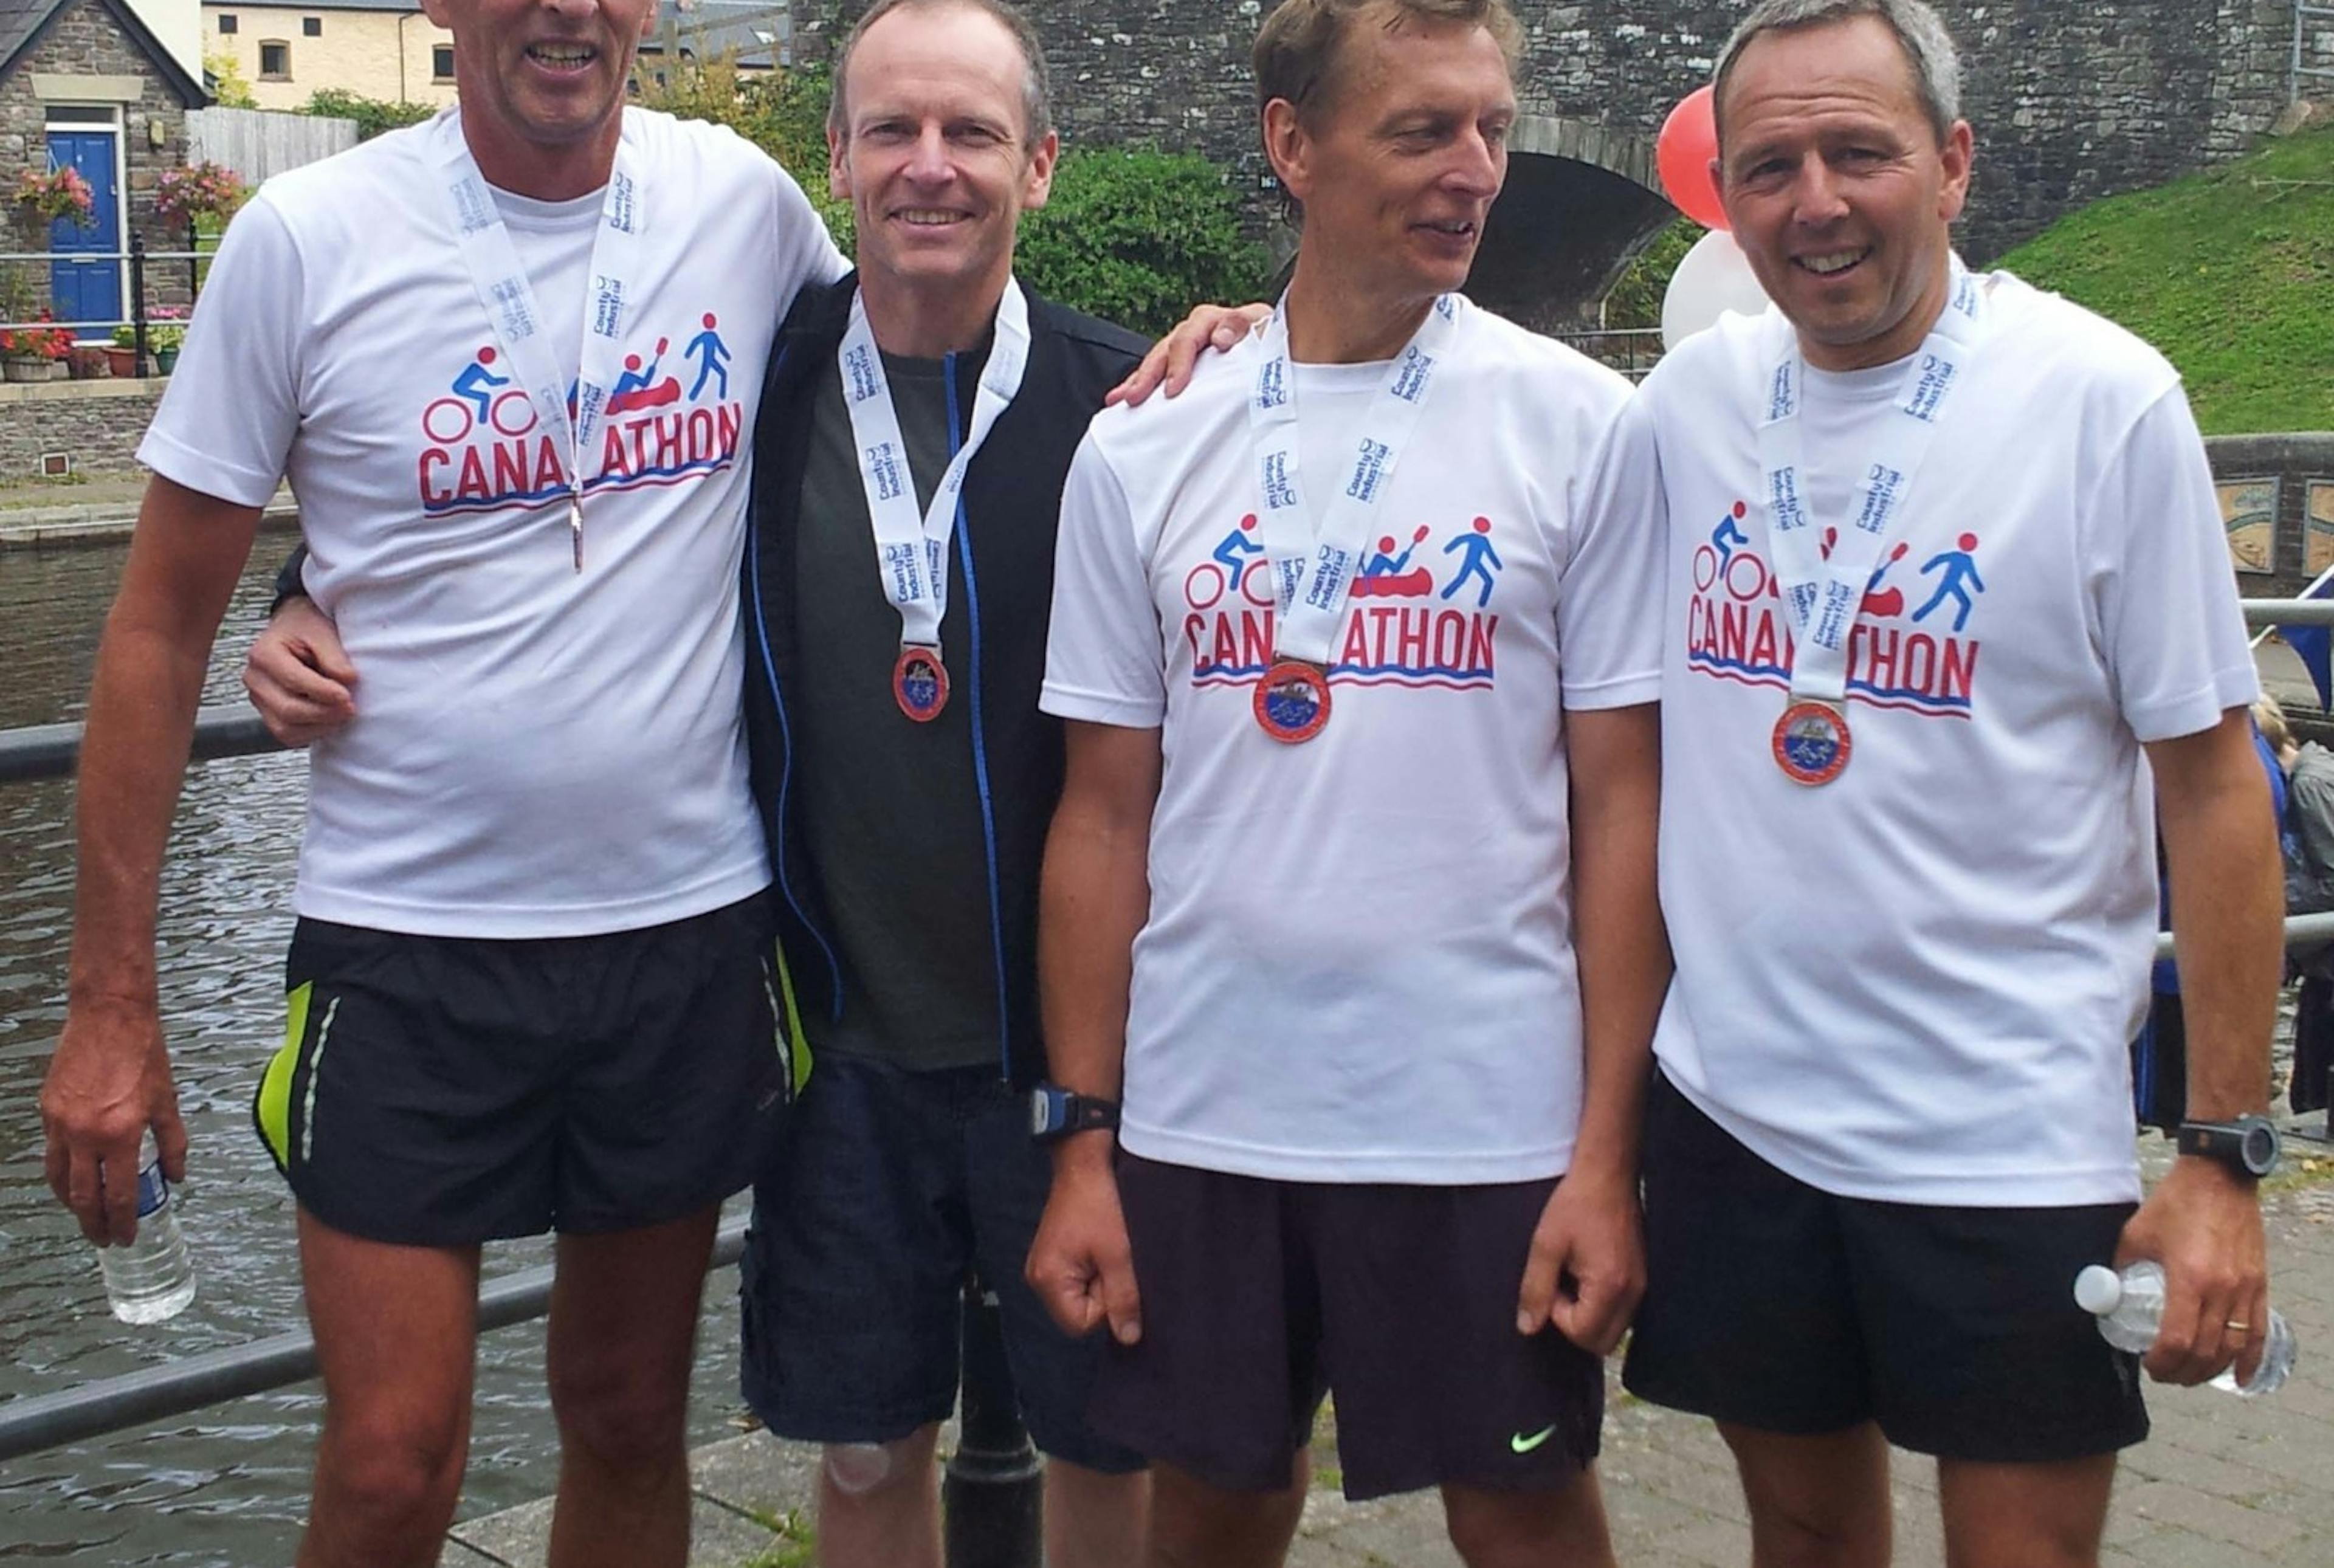 Monmouthshire & Brecon Canalathon a great success